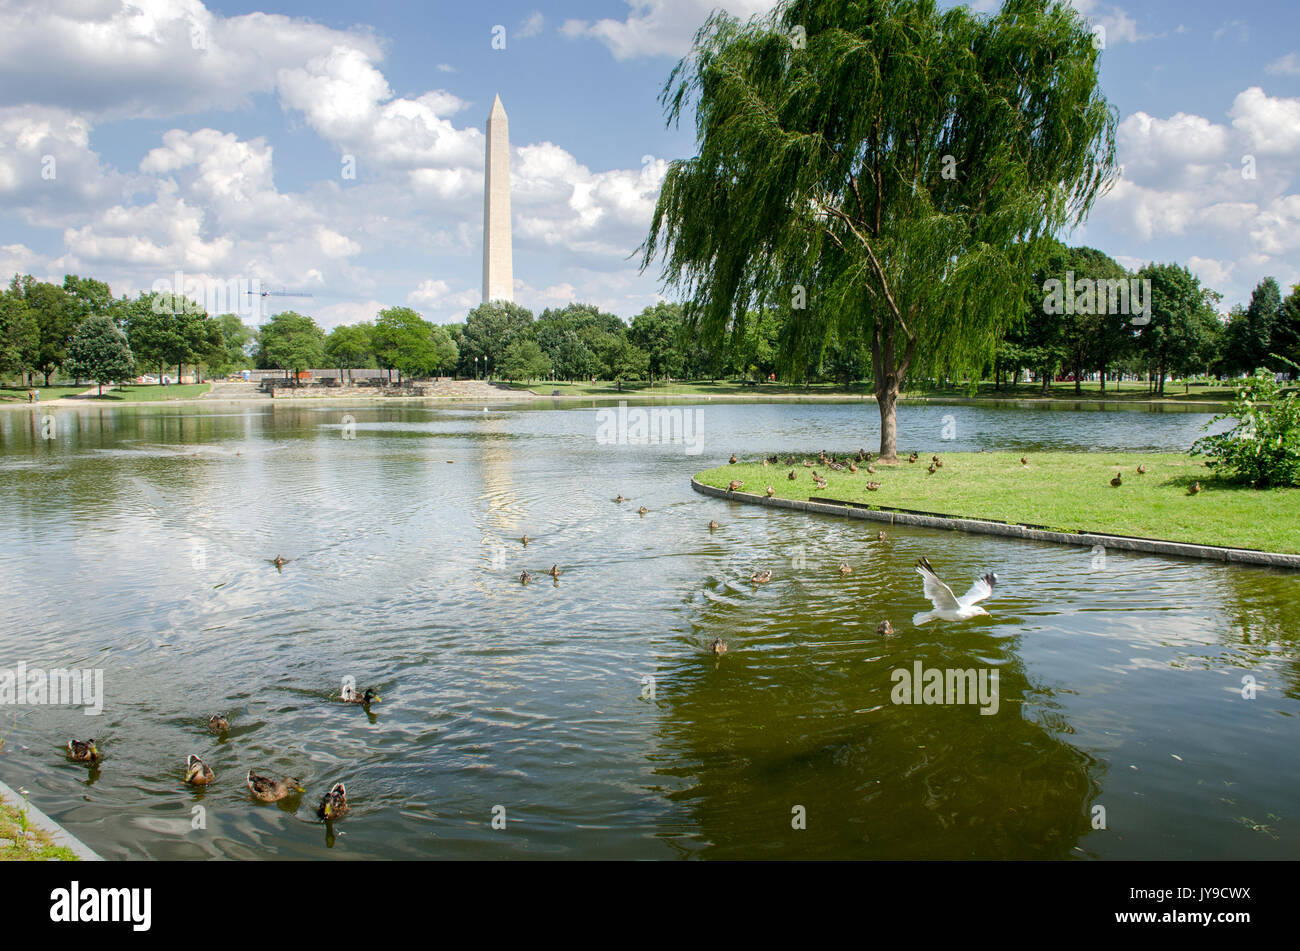 A lone sea gull amongst the ducks takes flight at Constitution Gardens, on the National Mall in Washington DC. Stock Photo